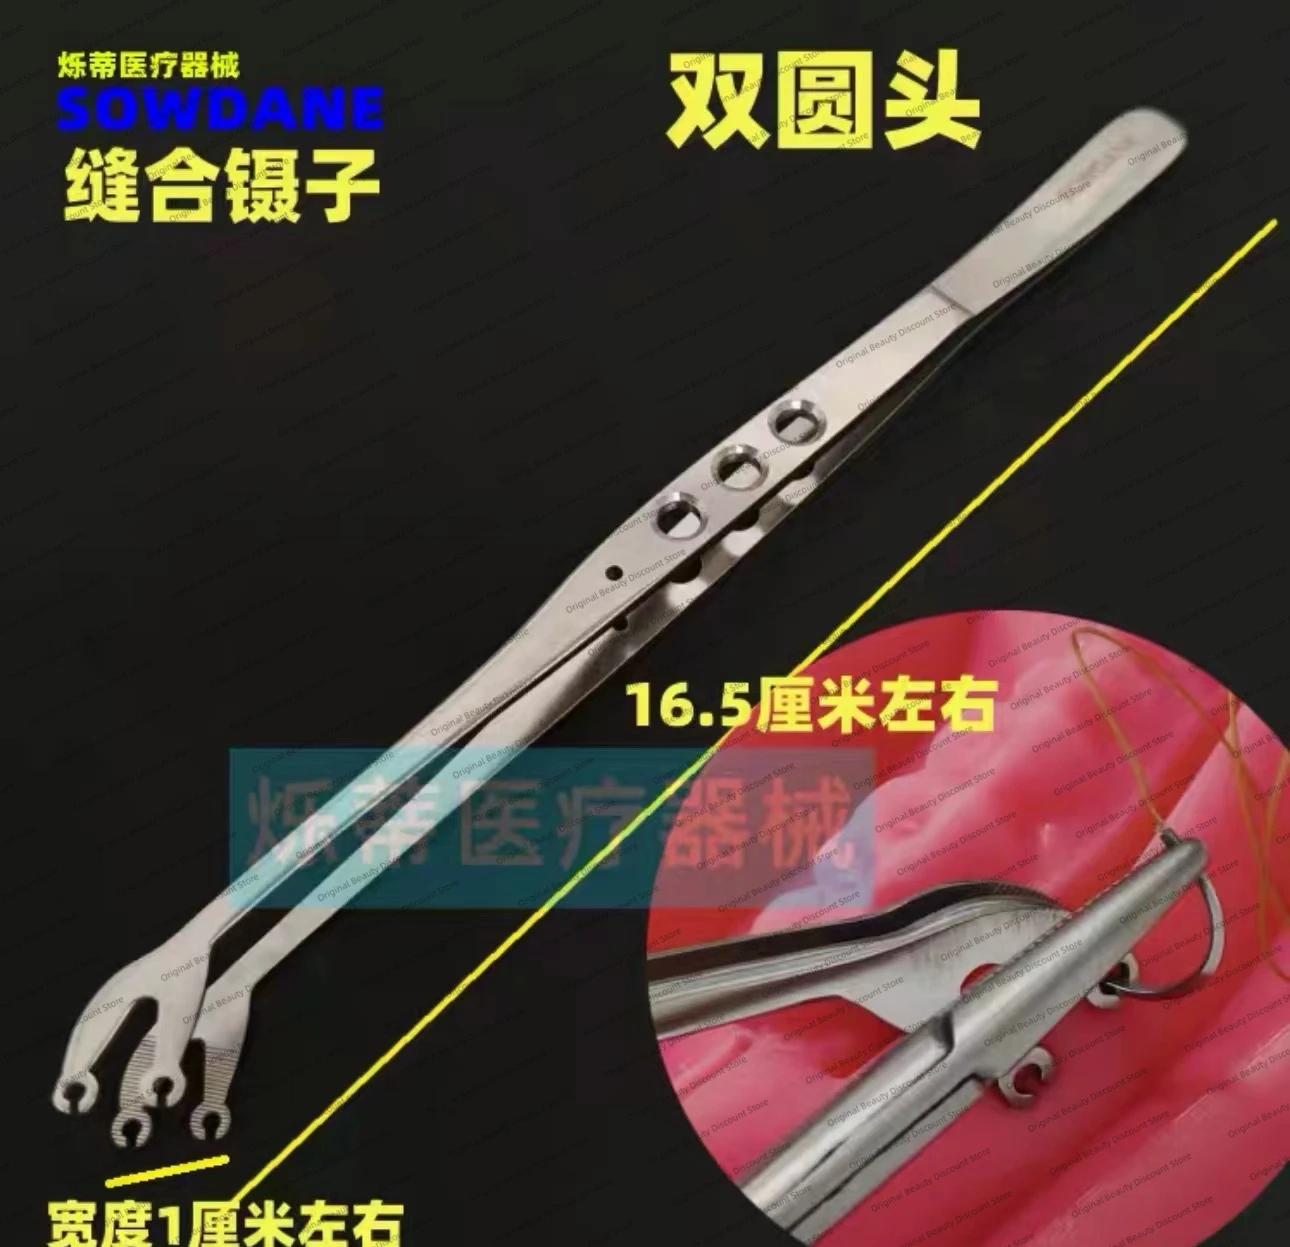 

Dental Surgical Operation Stitching Tweezer Serrated Tip Holder Suture Forcep Cotton Dressing Forceps Dentist Tools Autoclavable